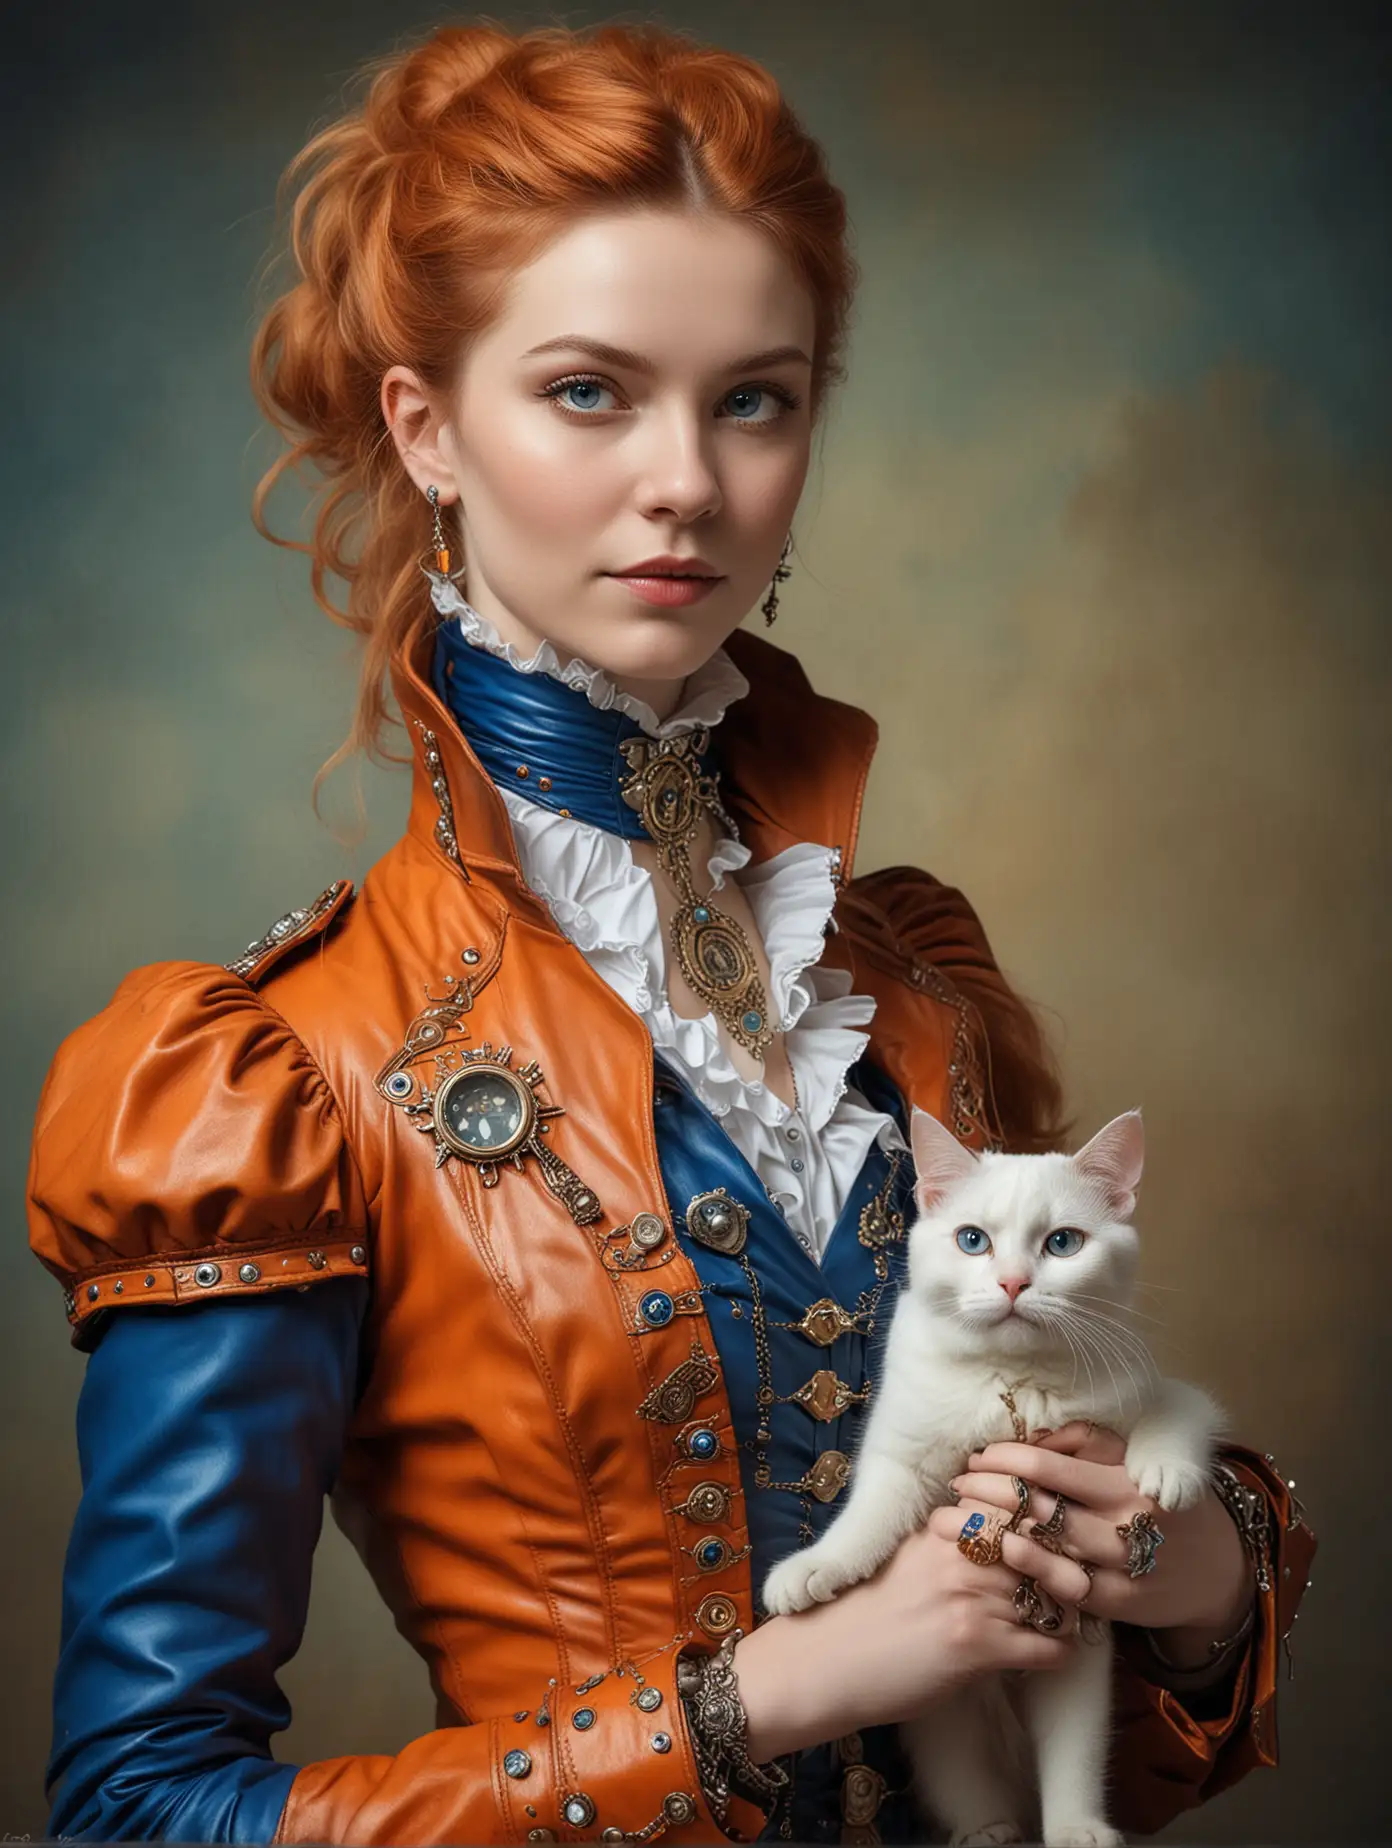 Steampunk Noble Woman Portrait with White Cat and Dutch Masters Style